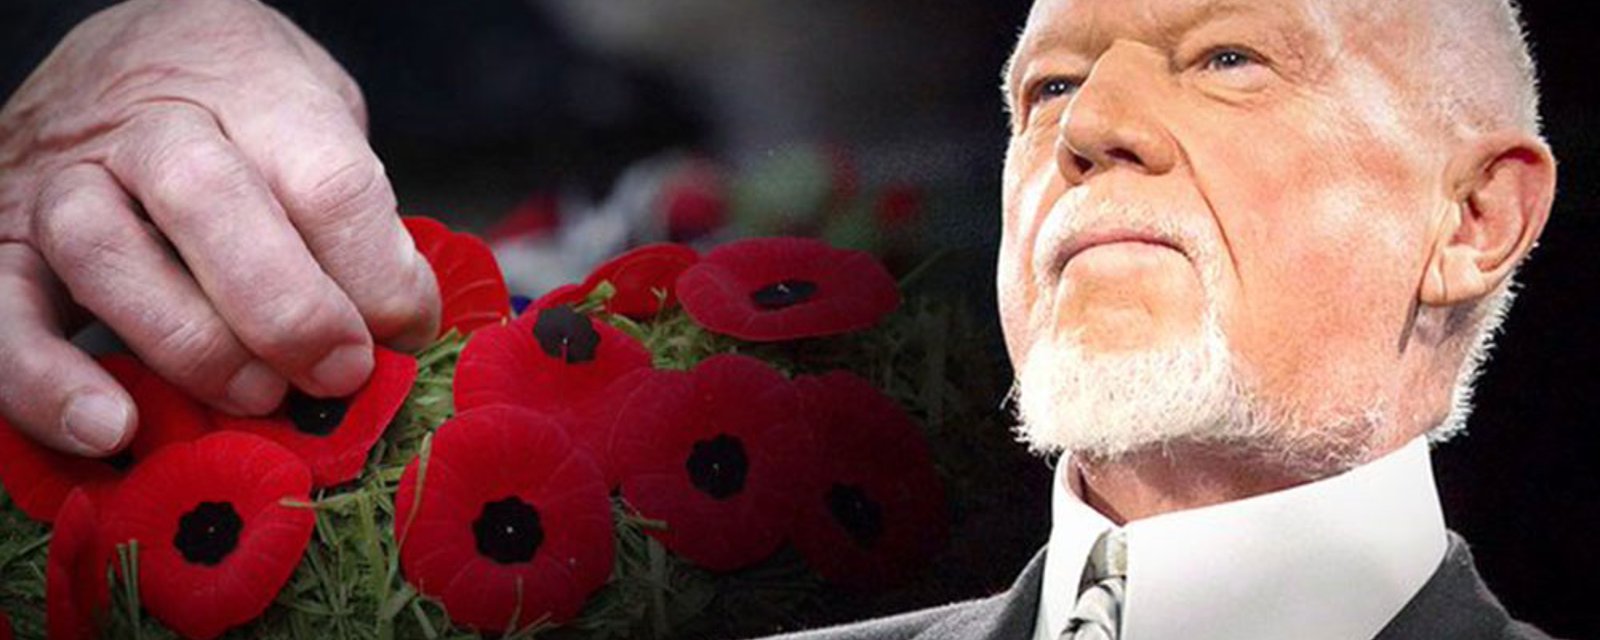 Don Cherry refuses to apologize, says “I know what I said and I meant it.”